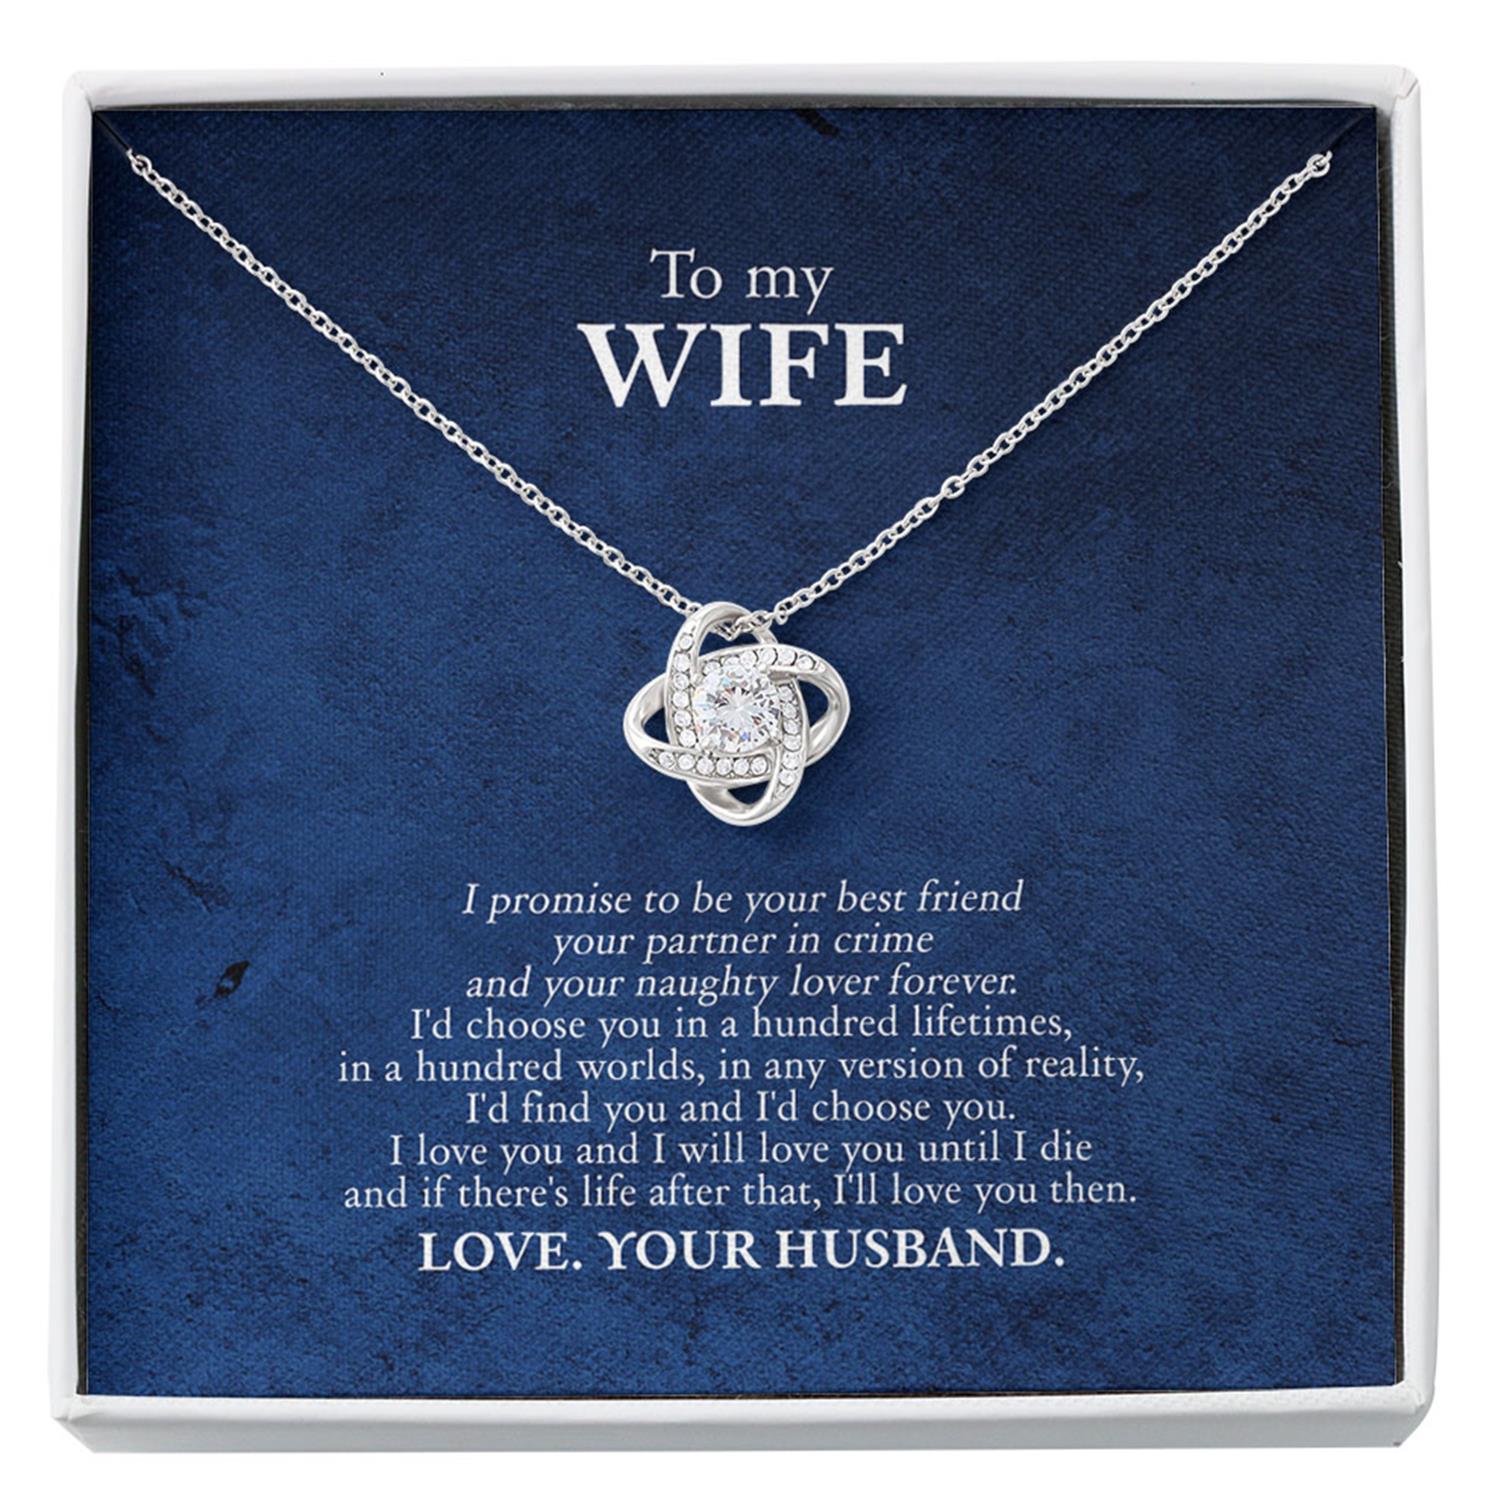 Wife Necklace, To My Wife Necklace Gift From Husband - I'd Choose You Custom Necklace